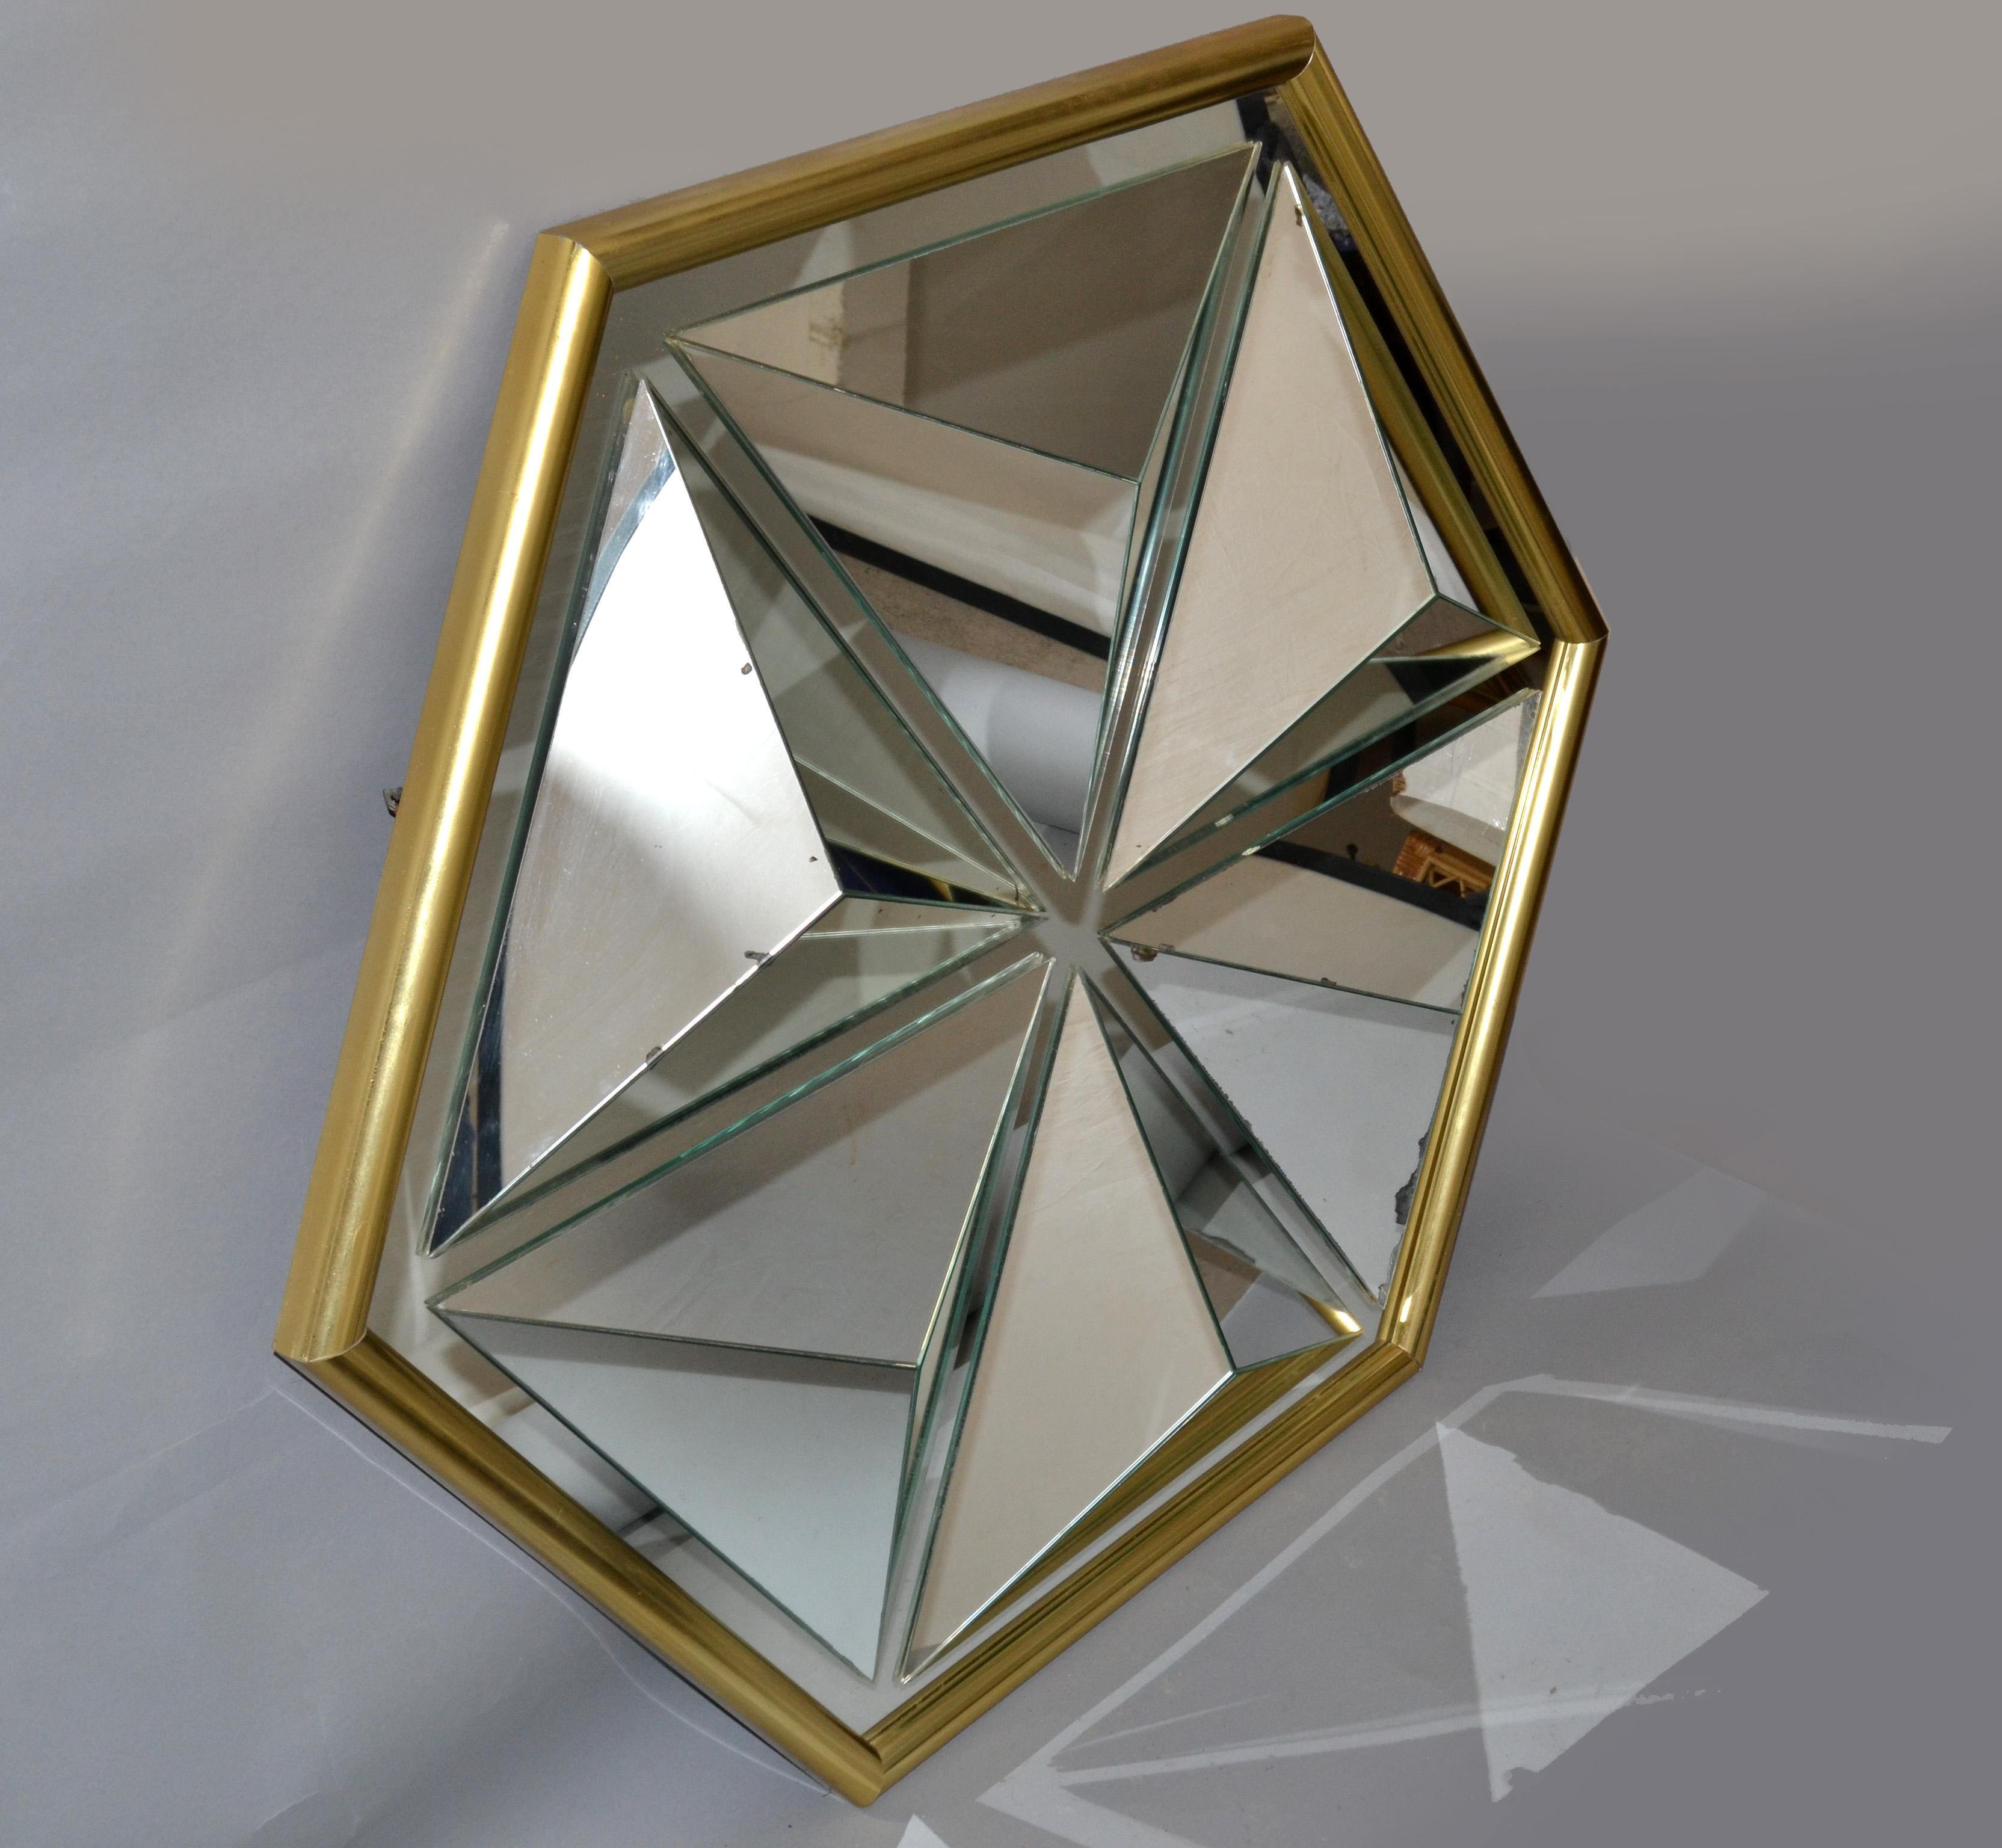 One of a kind diamond shaped faceted wall mirror made in the USA in the 1976.
Hand painted gold finish frame.
Mid-Century Modern design for any interior.
Secure hanging construction and supported by the wood backboard.